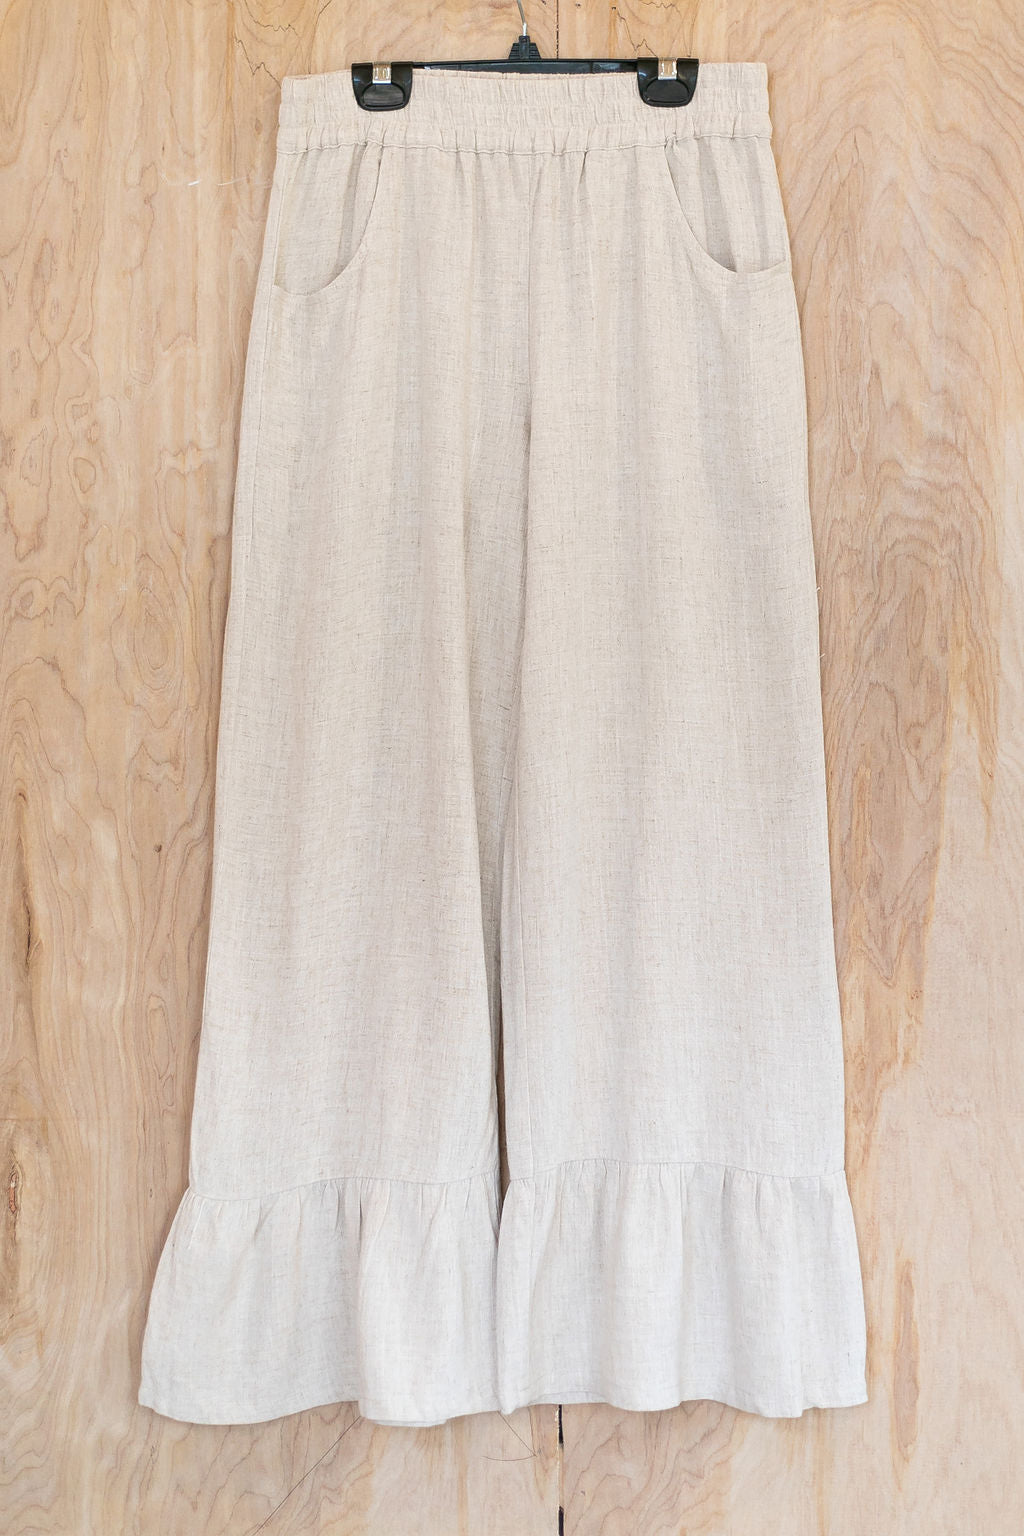 True Statement Wide Leg Linen Pants in Oatmeal Ivory - Giddy Up Glamour Boutique